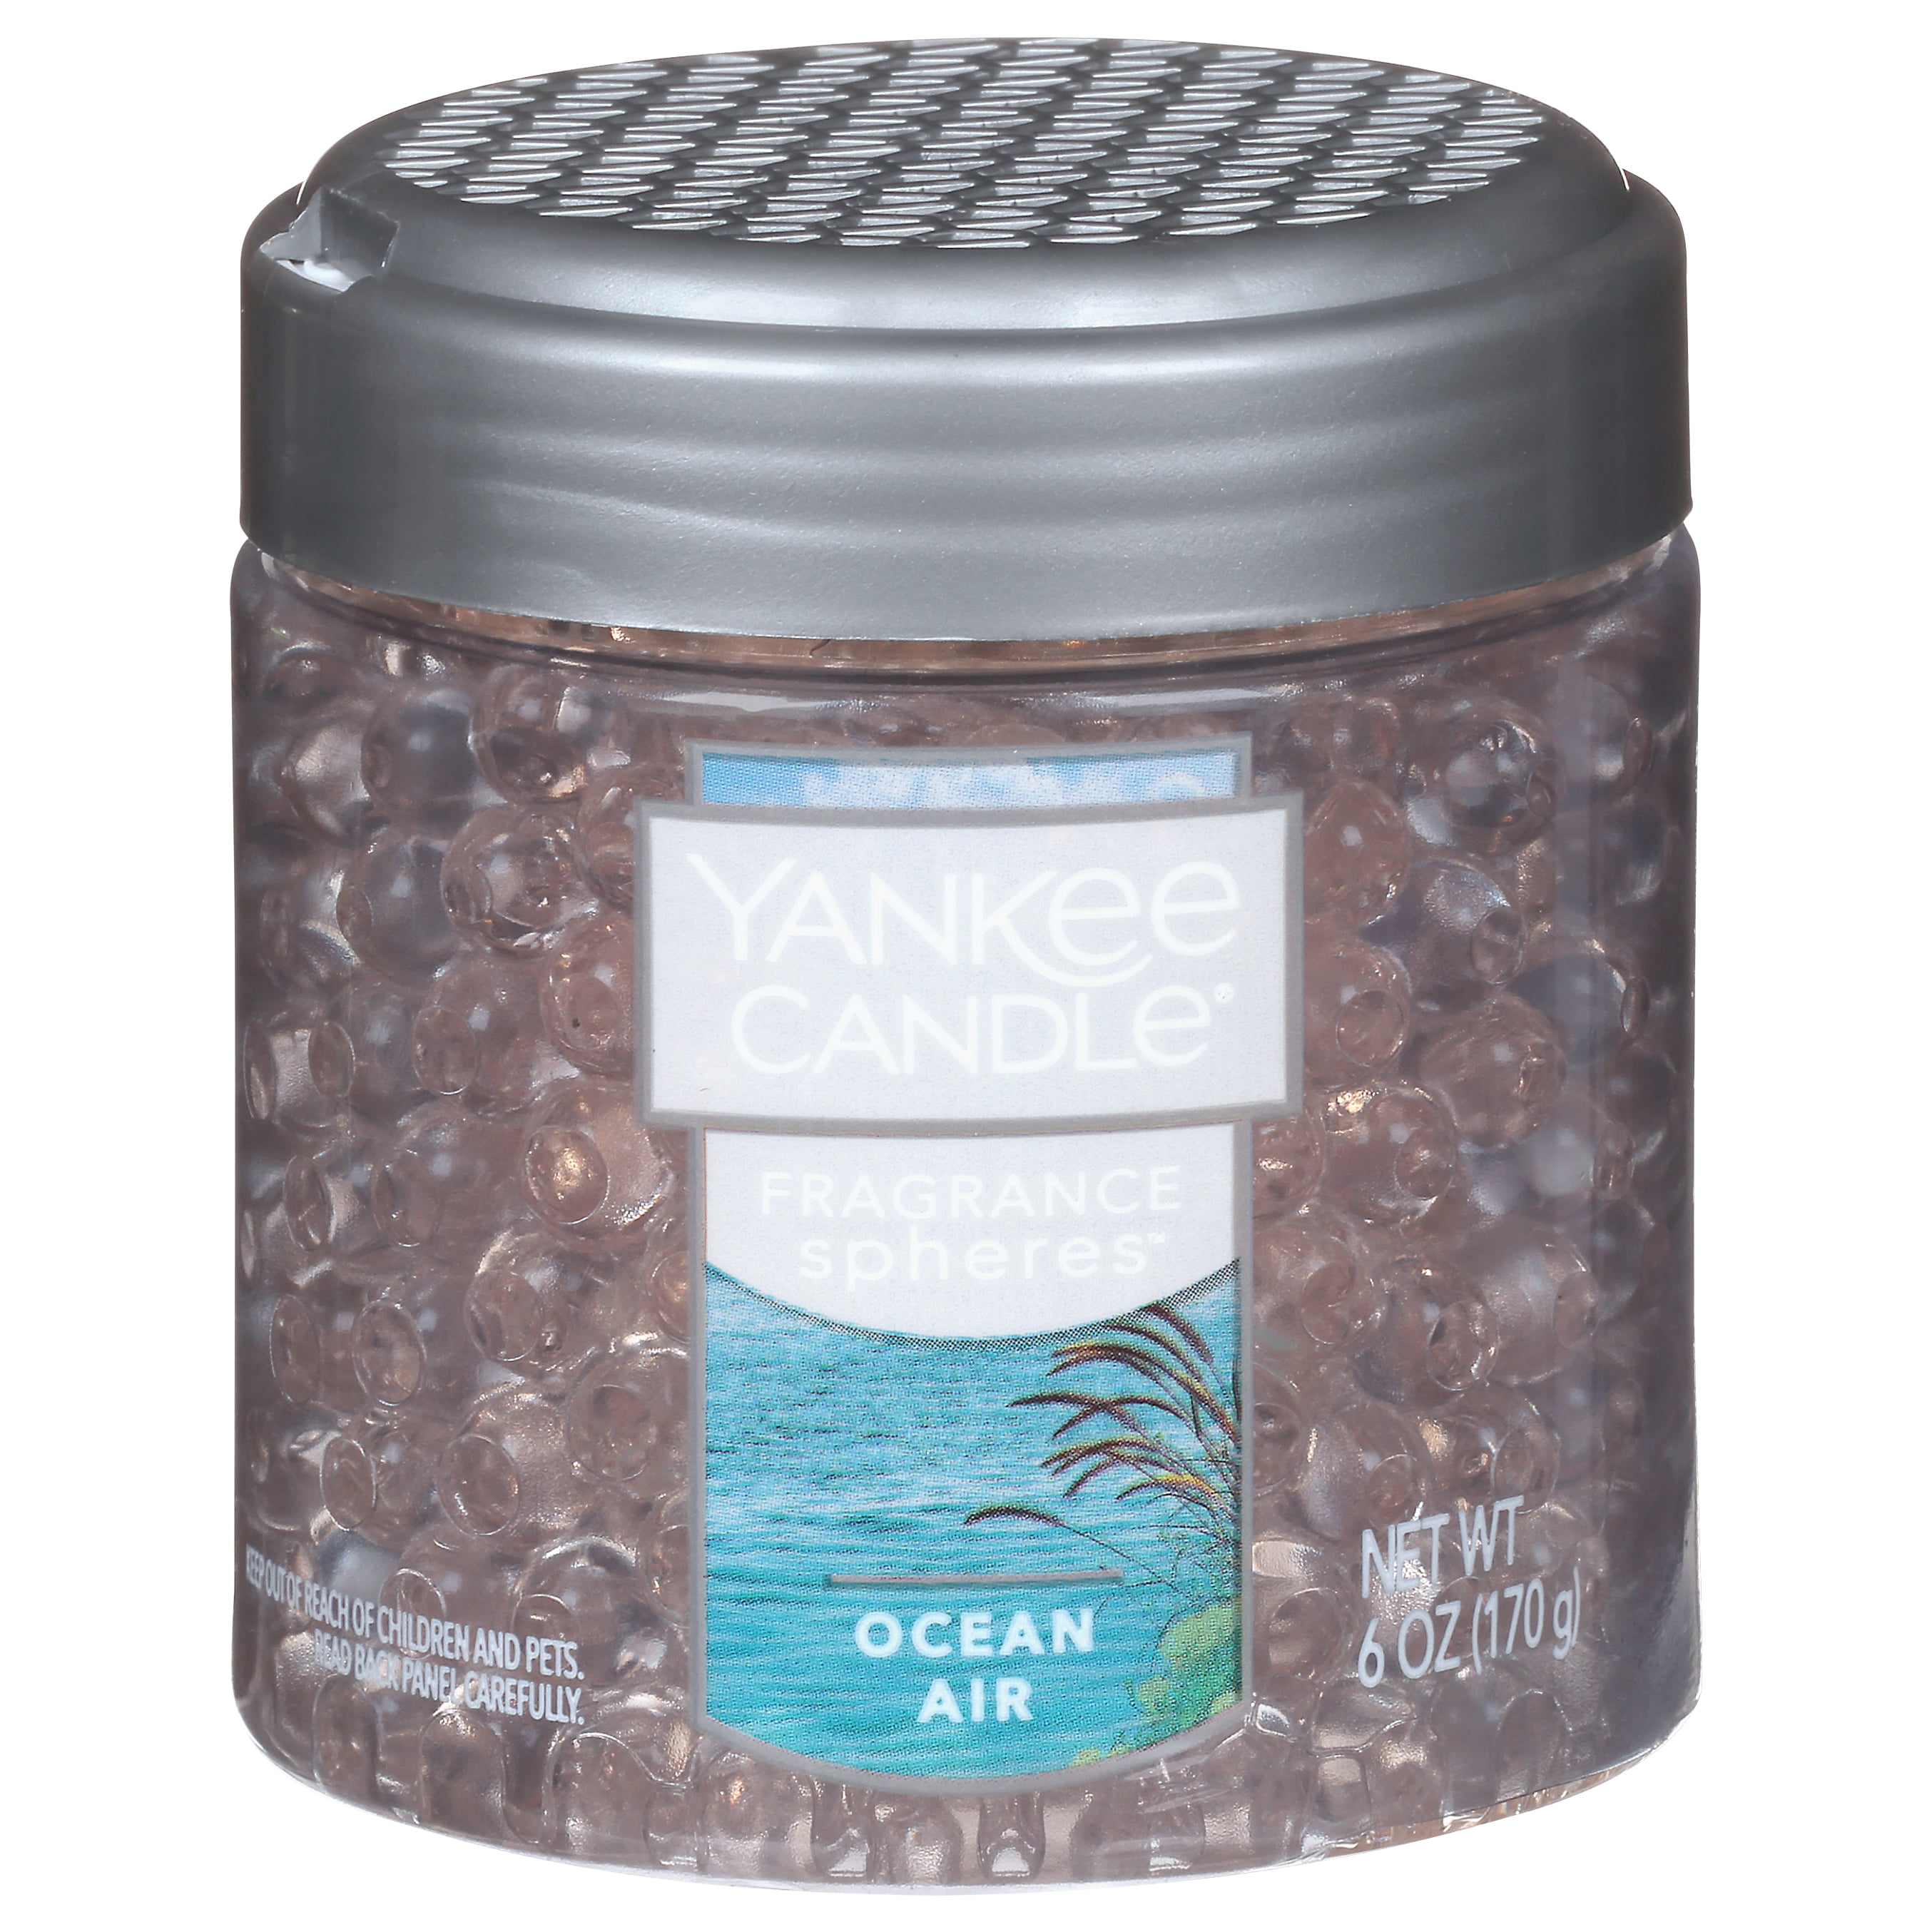 Candle Review: Ocean Air from Yankee Candle 